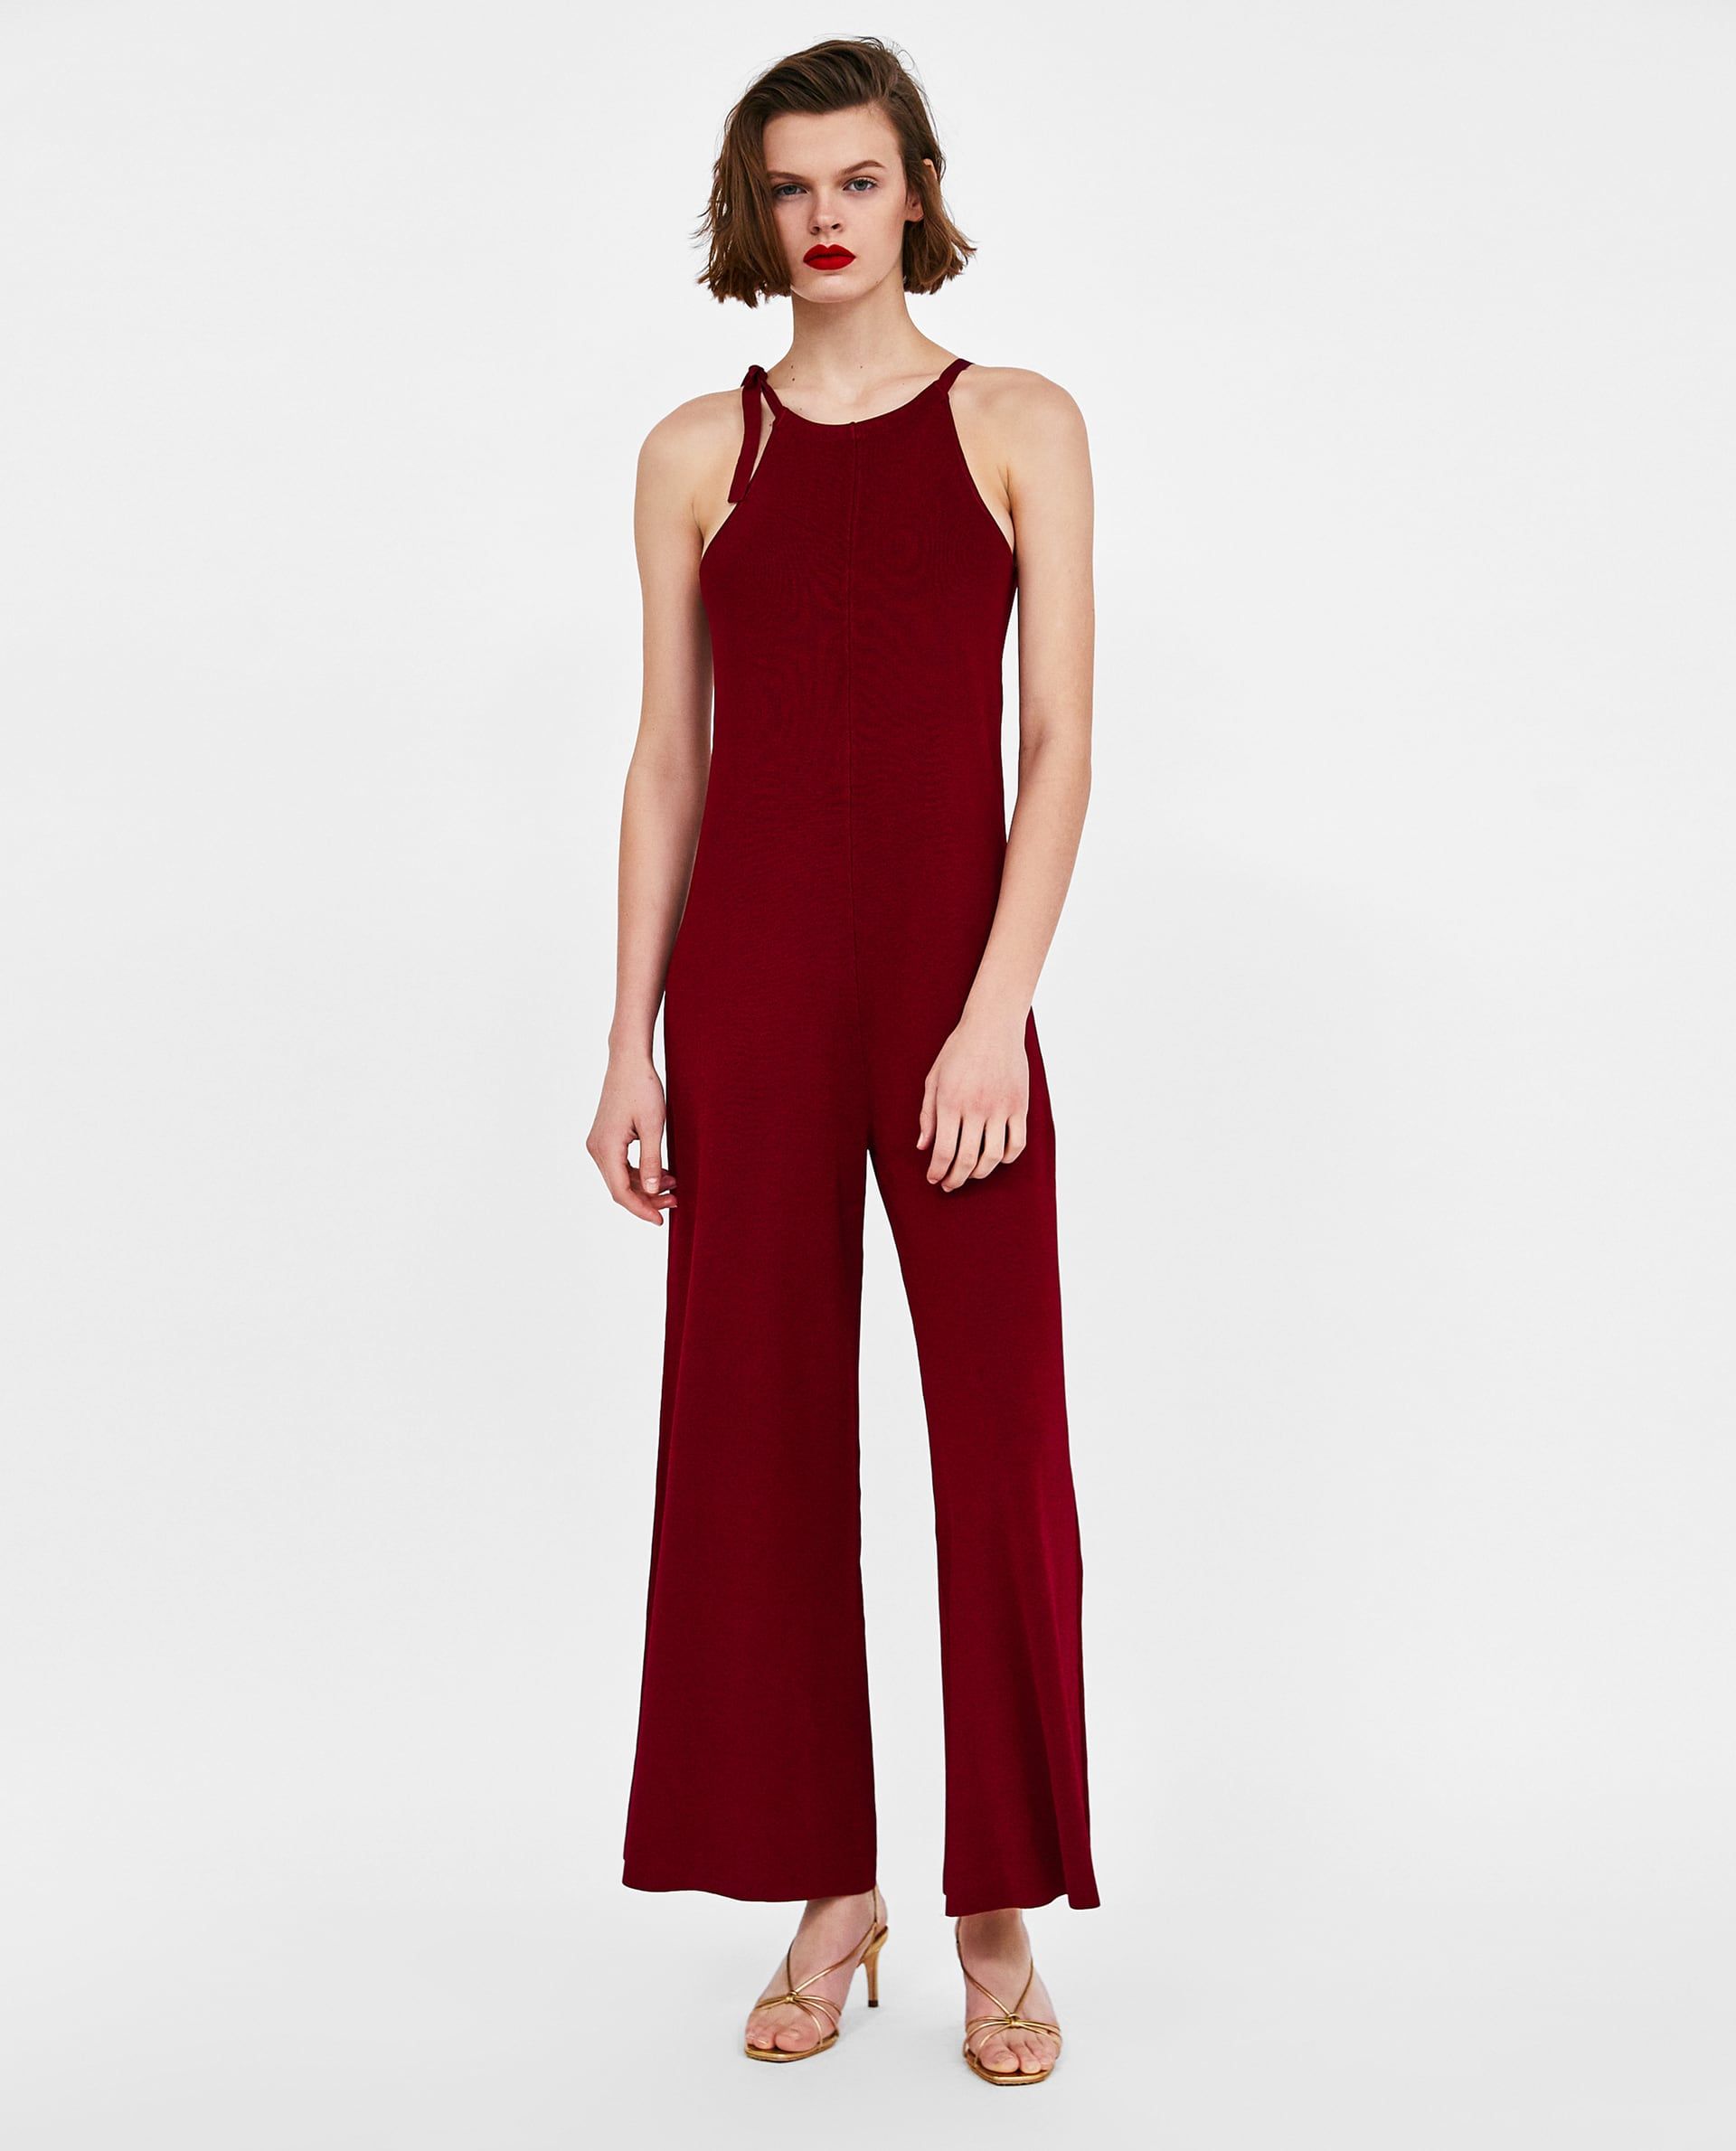 The 20 Best Jumpsuits From Zara | Who What Wear